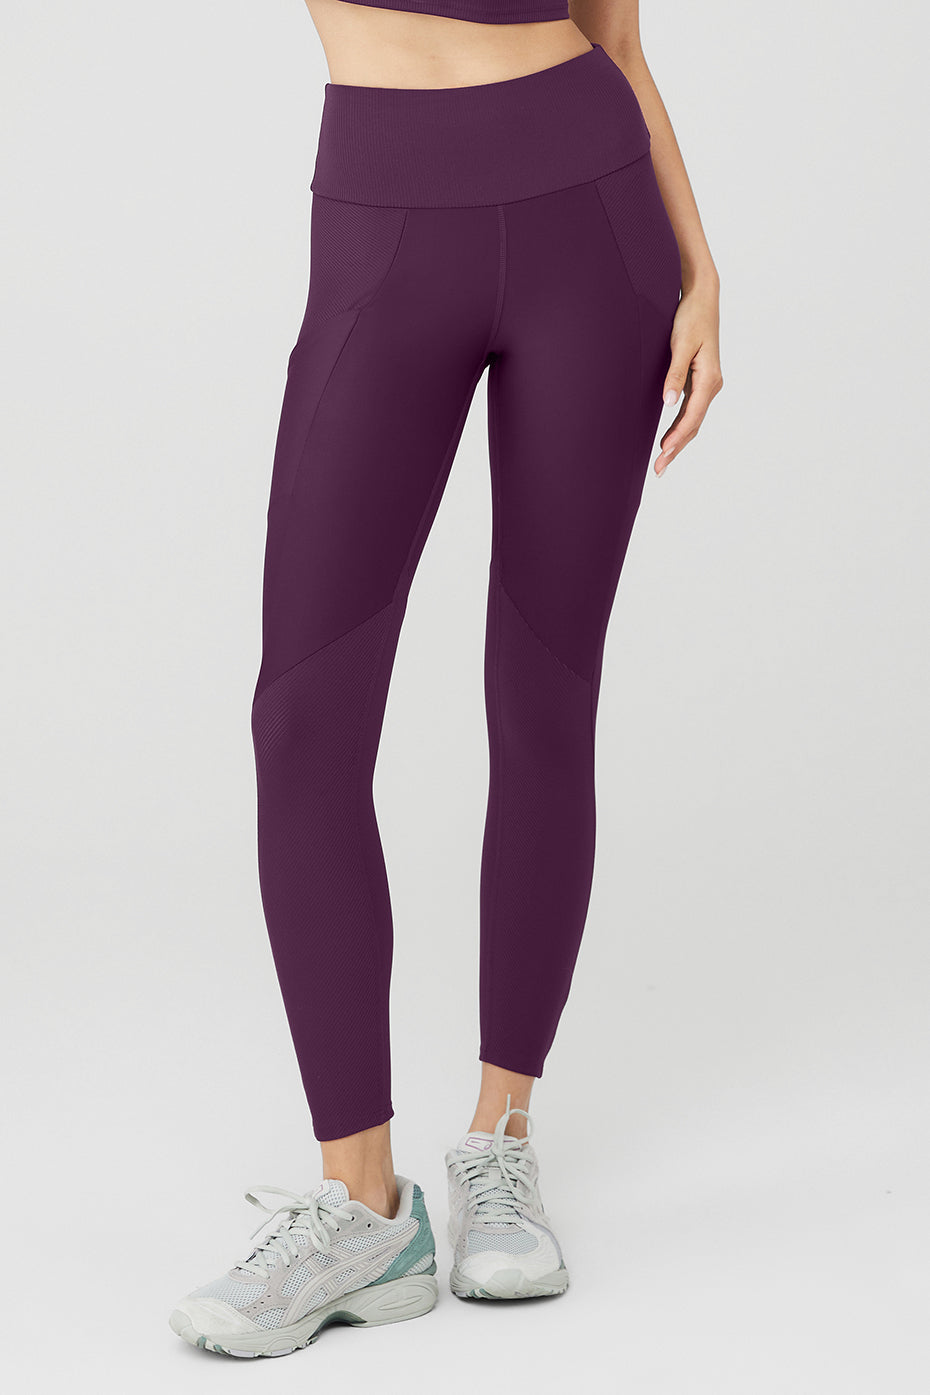 Lululemon All The Right Places Crop Yoga Pants (Black, 12